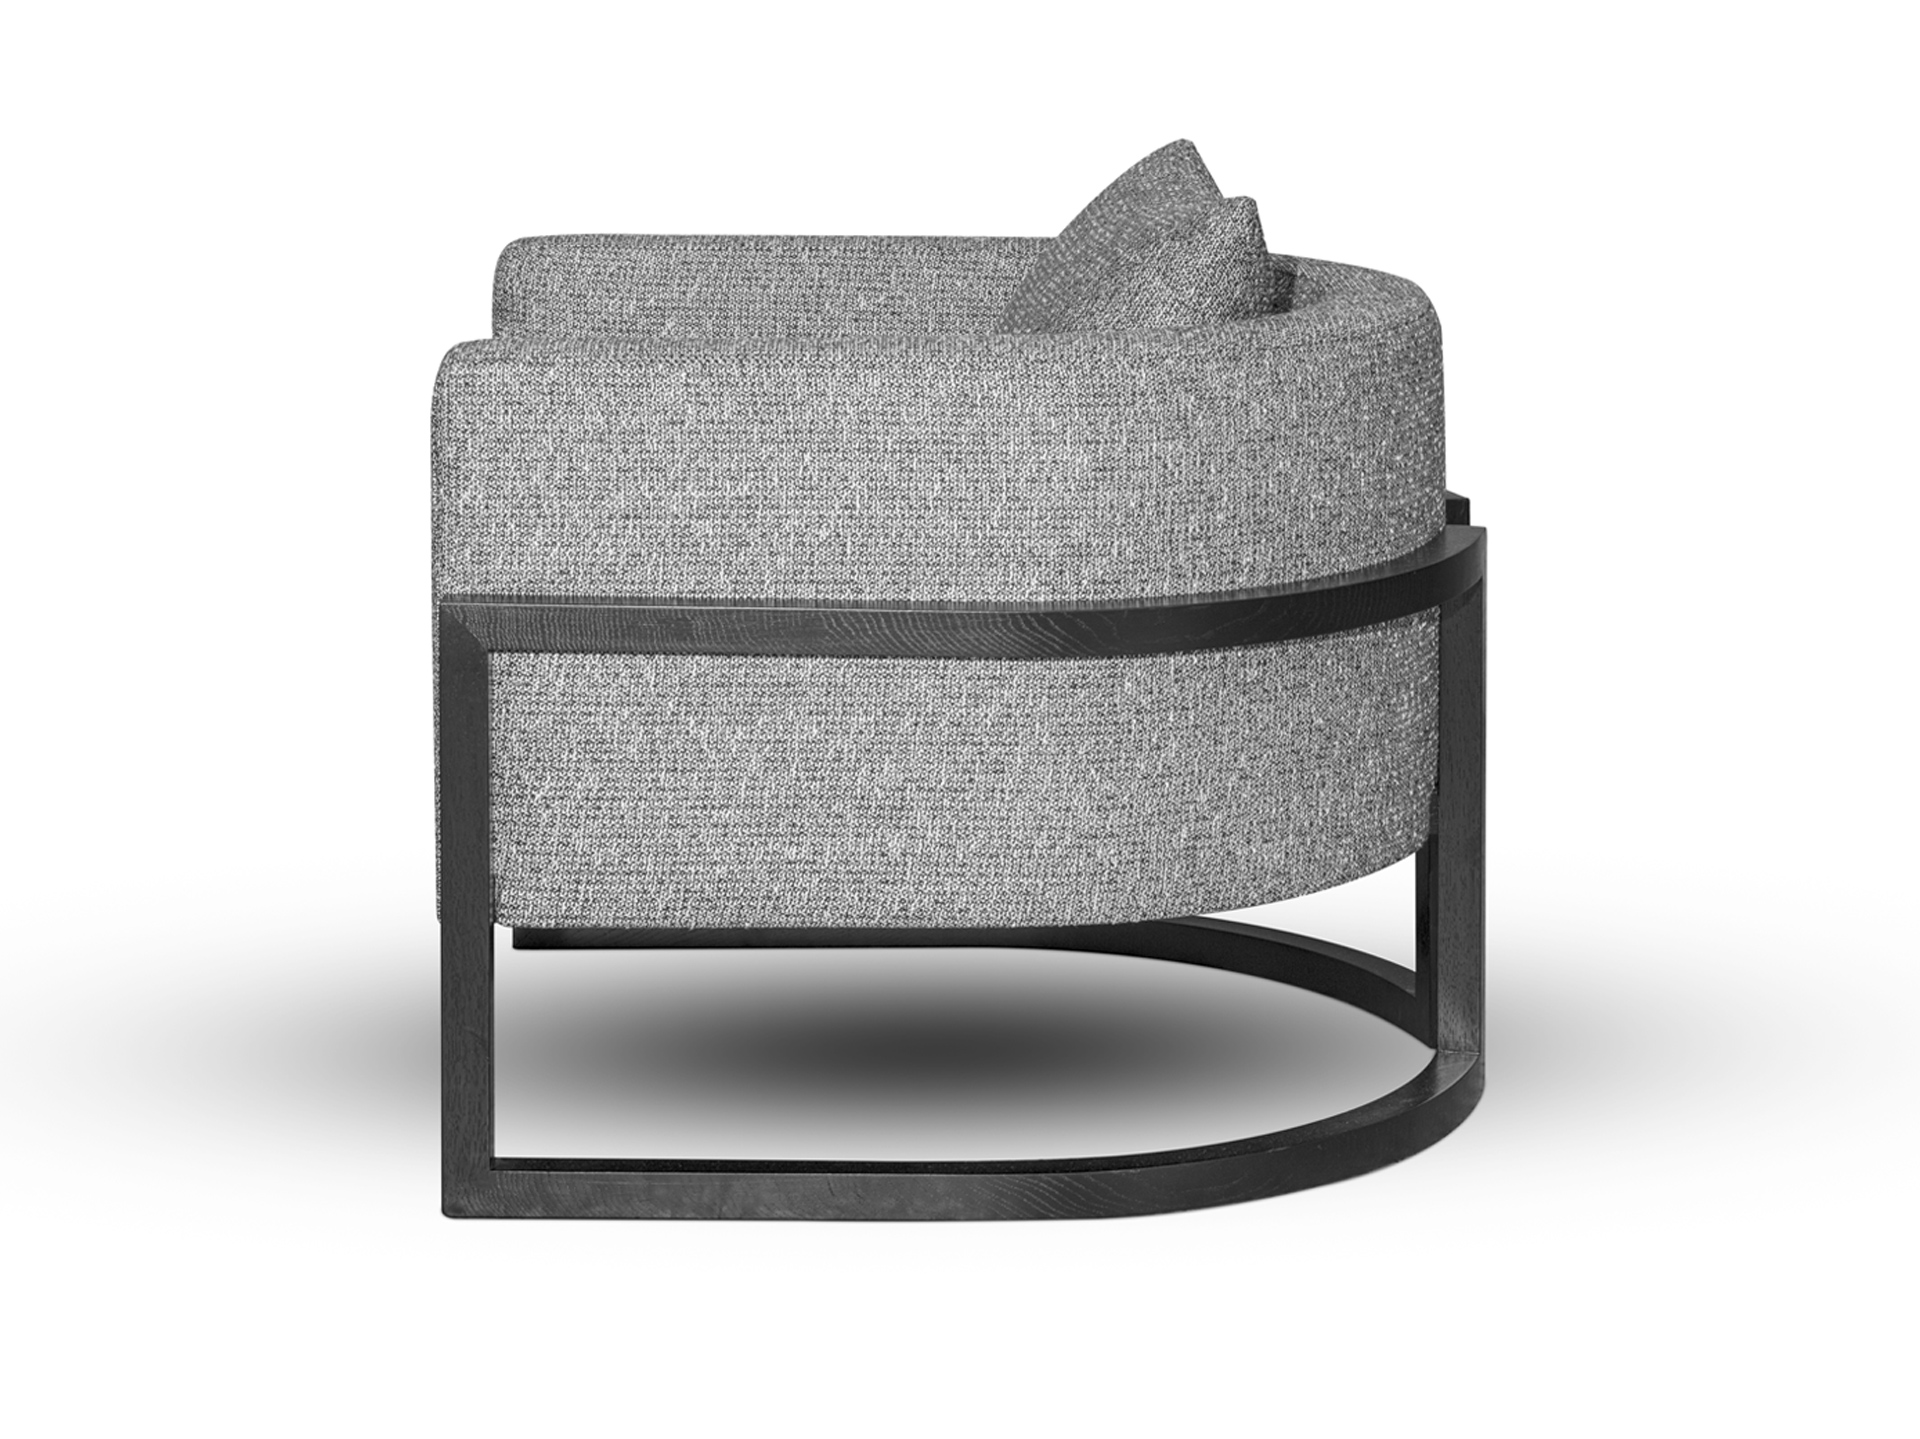 A stunningly beautiful smoky grey woven fabric is carefully nestled in a chic dark wood half circle cradle. Custom sizes and materials available. Made to order by hand in (...)